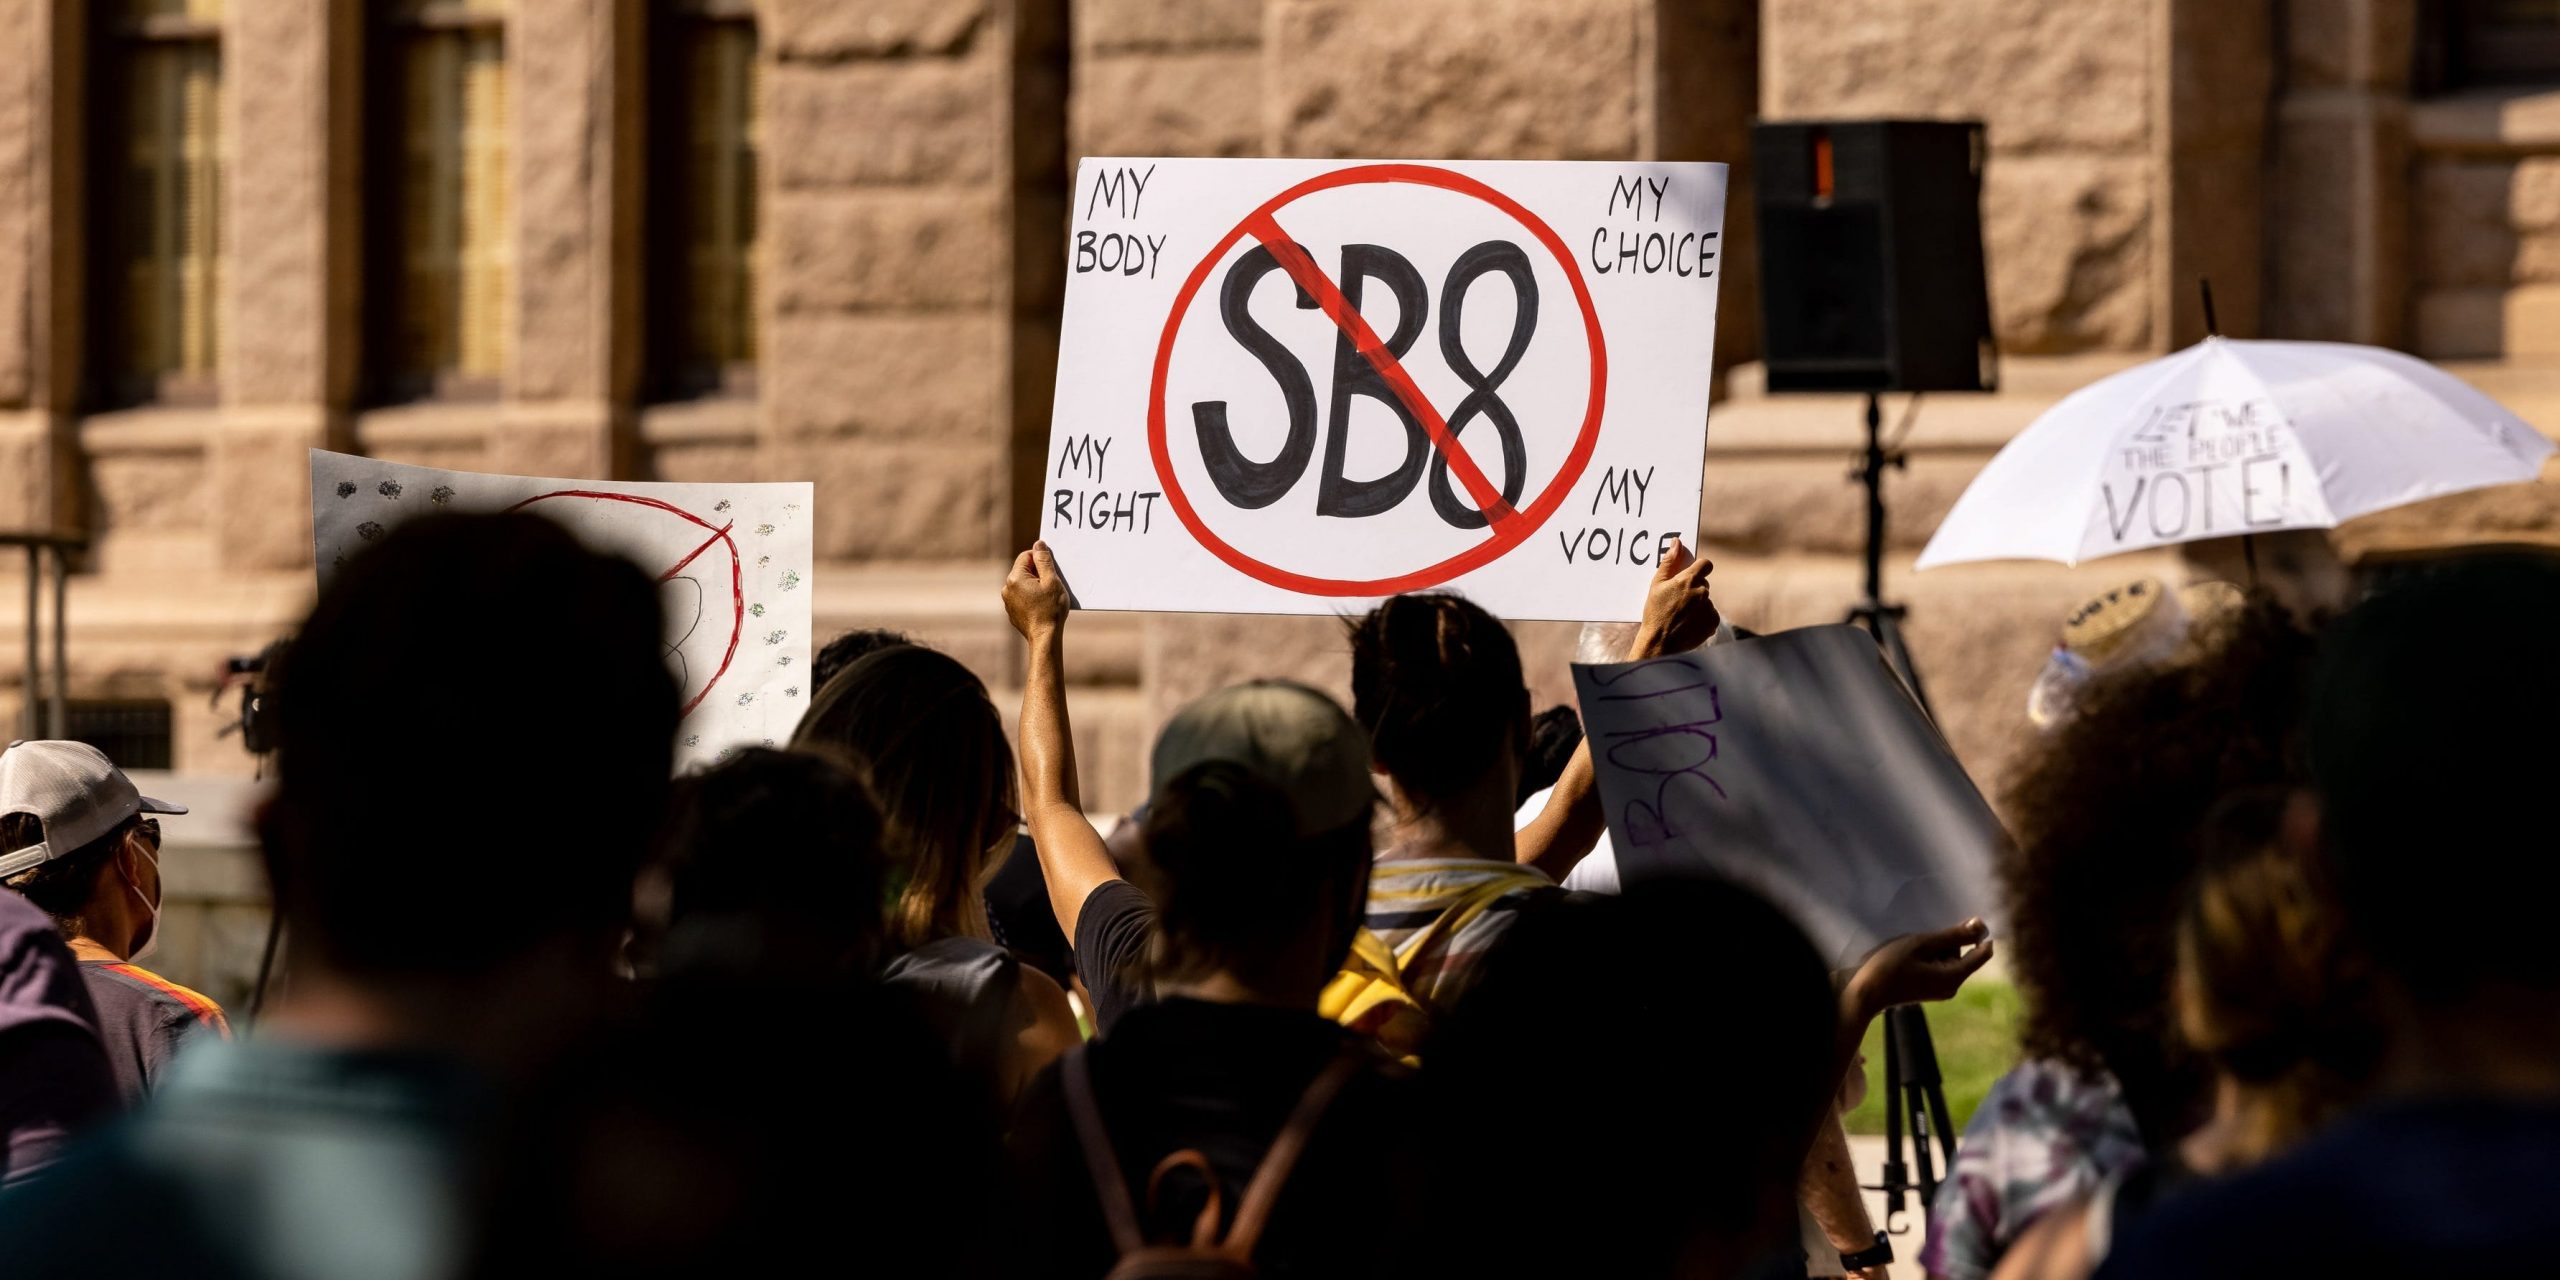 Abortion rights activists rally at the Texas State Capitol against SB 8, which prohibits abortions in Texas after a fetal heartbeat is detected on an ultrasound, on September 11, 2021 in Austin, Texas.